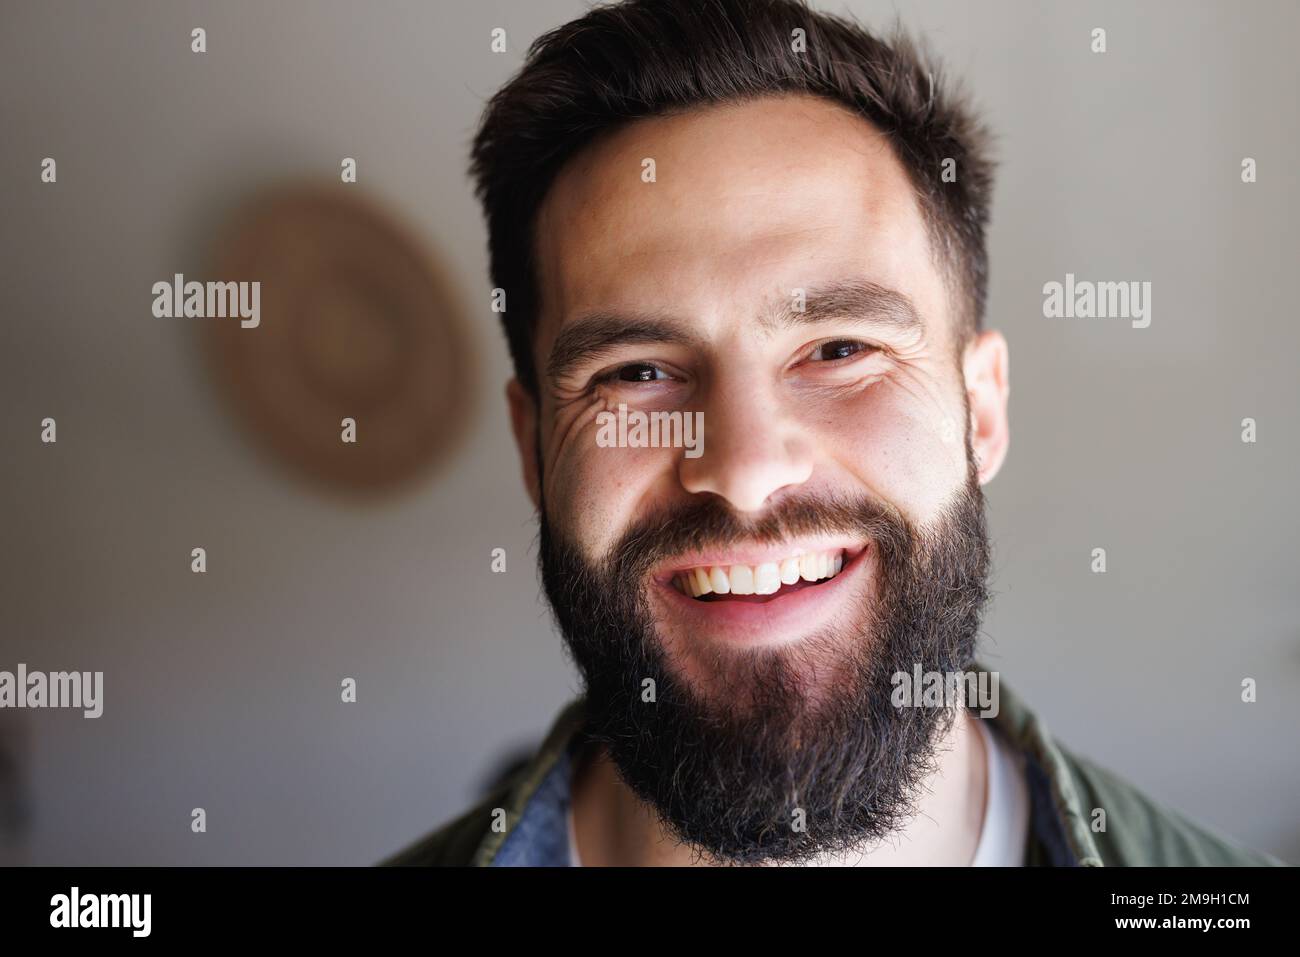 Close-up portrait of handsome bearded biracial young man smiling against white wall, copy space Stock Photo